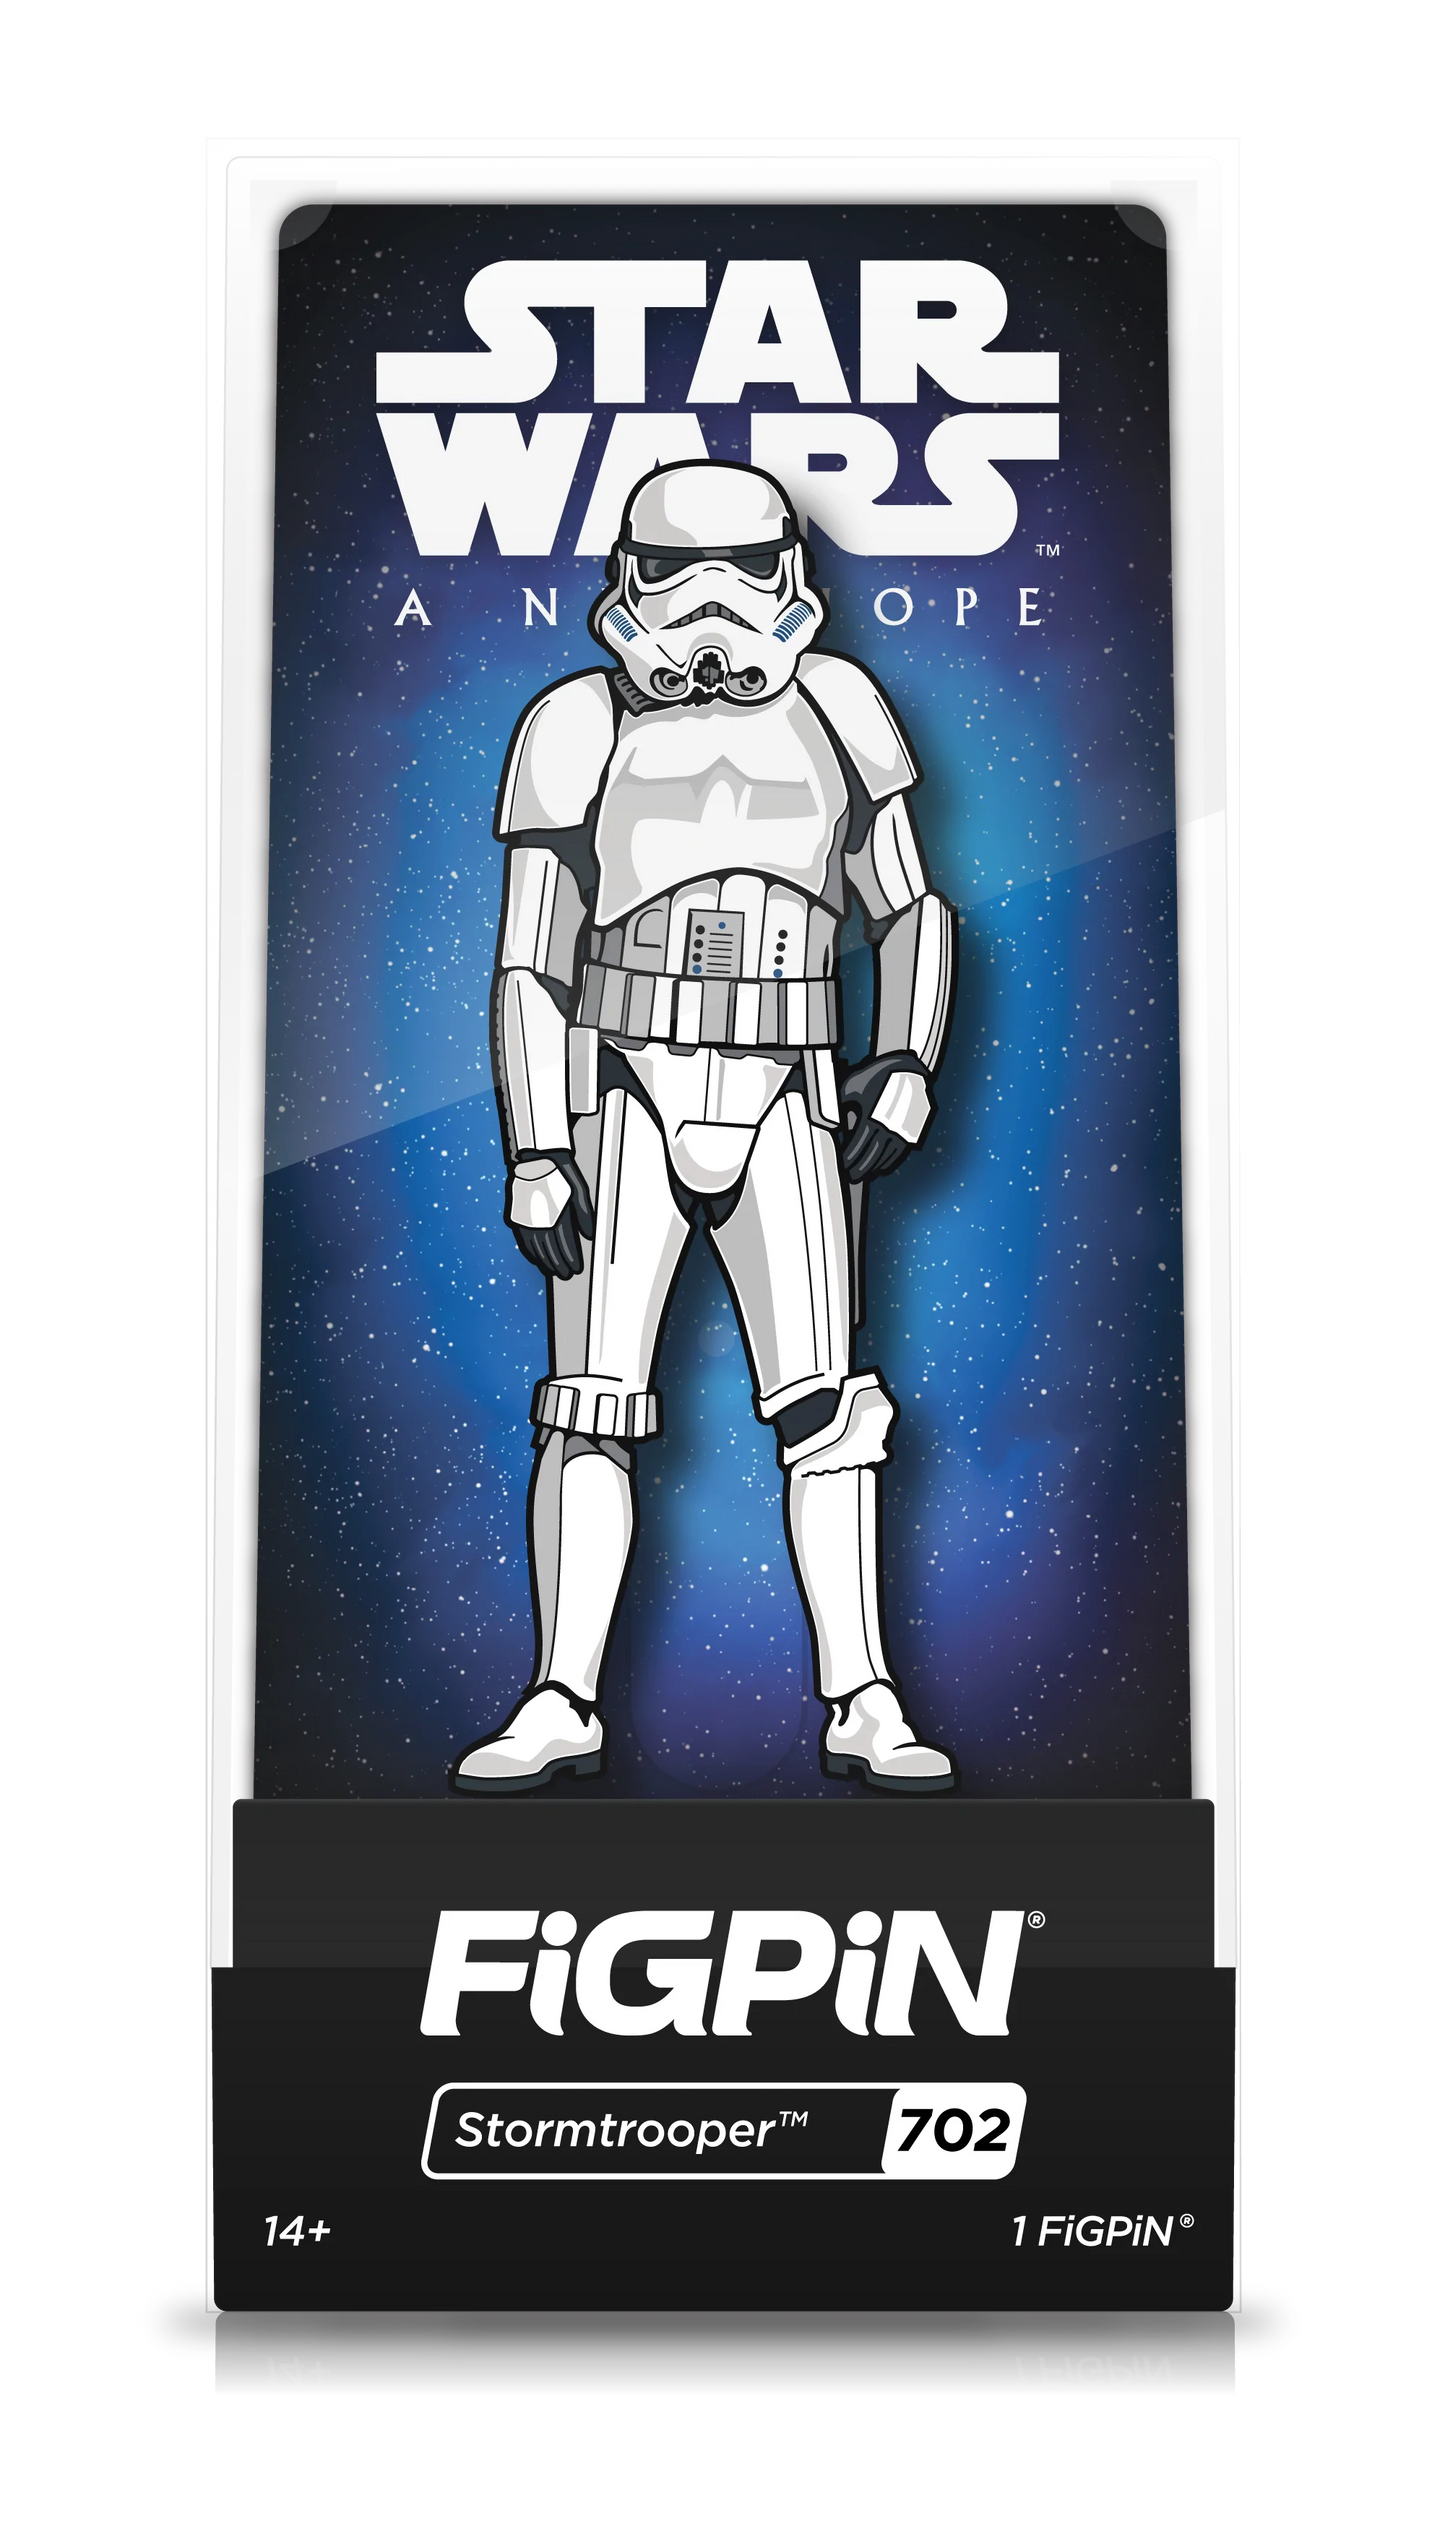 FiGPiN Stormtrooper (702) Property: Star Wars A New Hope